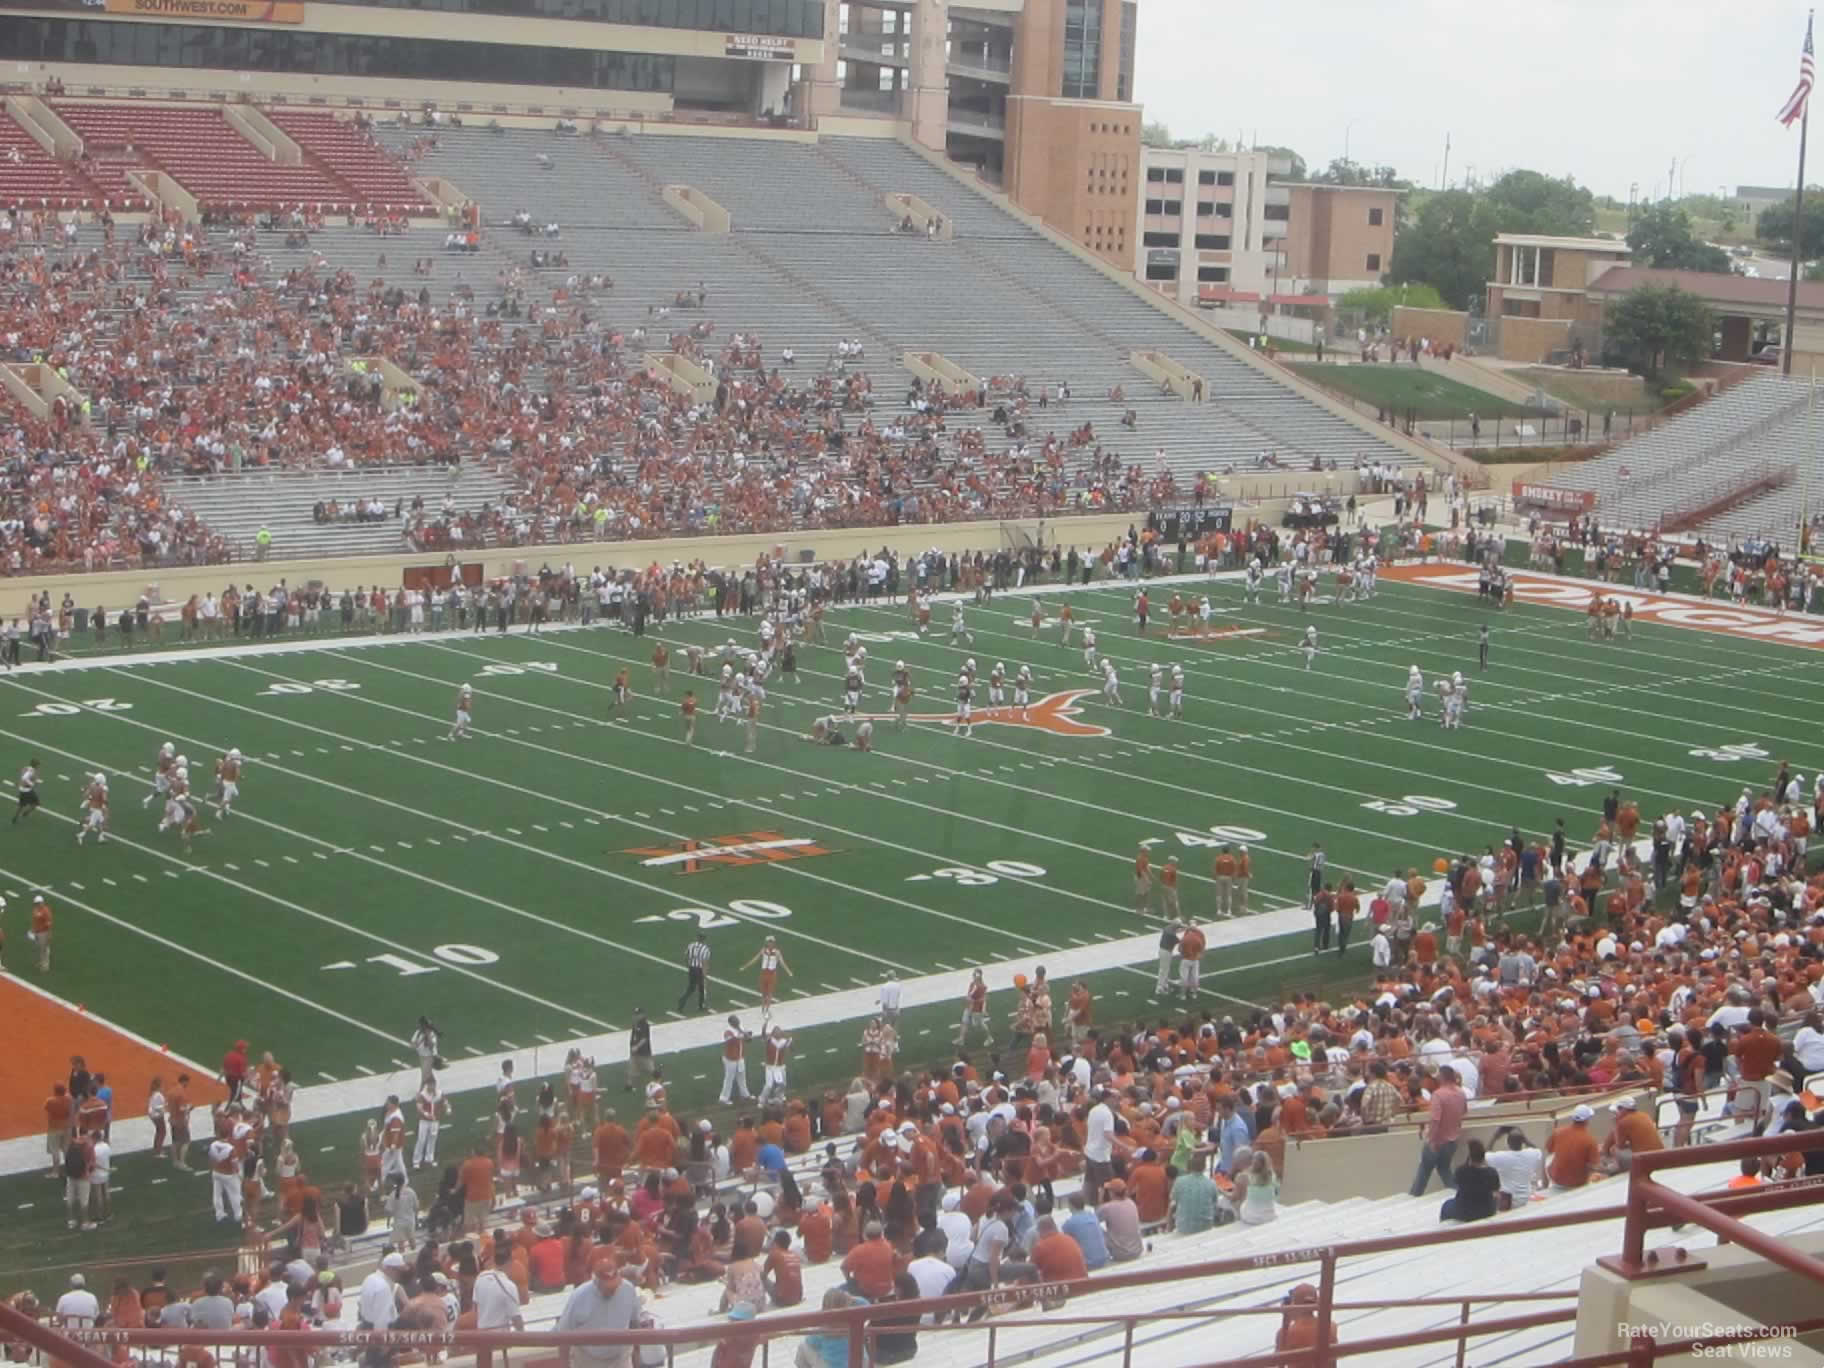 section 10, row 61 seat view  - dkr-texas memorial stadium